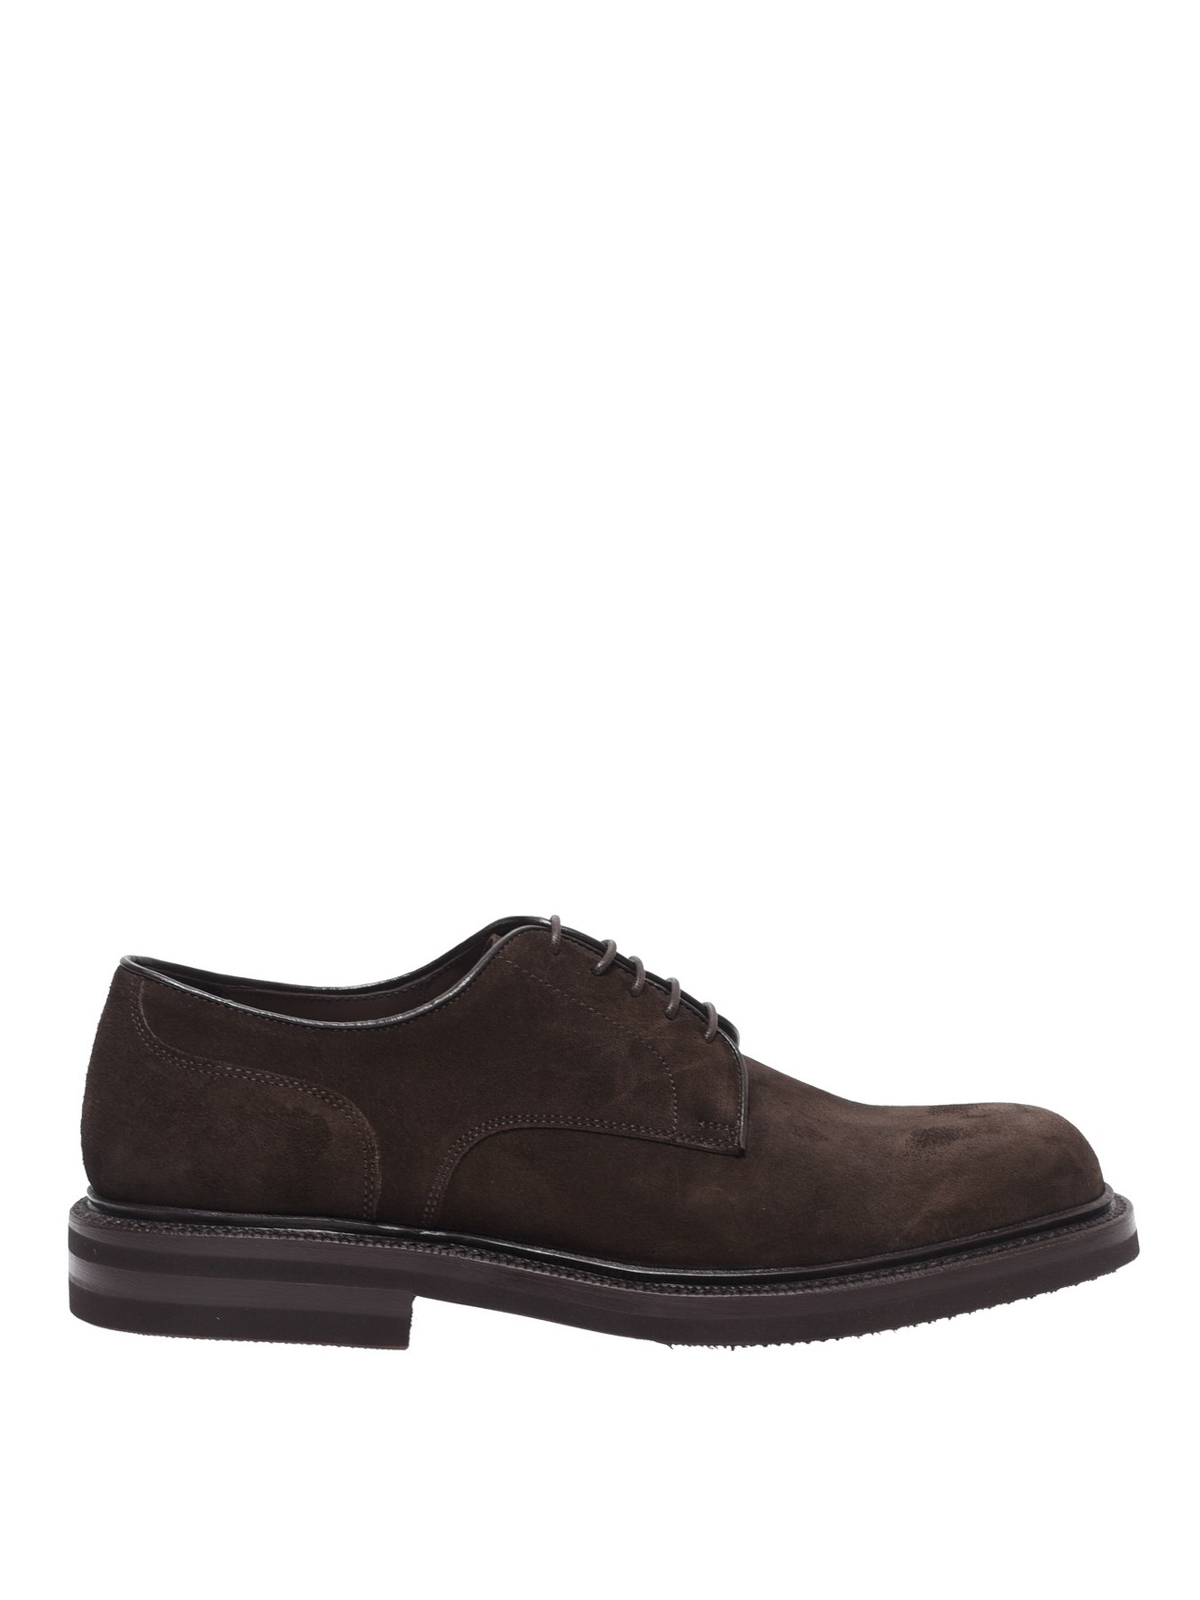 Lace-ups shoes Green George - Dark brown suede lace up derby shoes ...